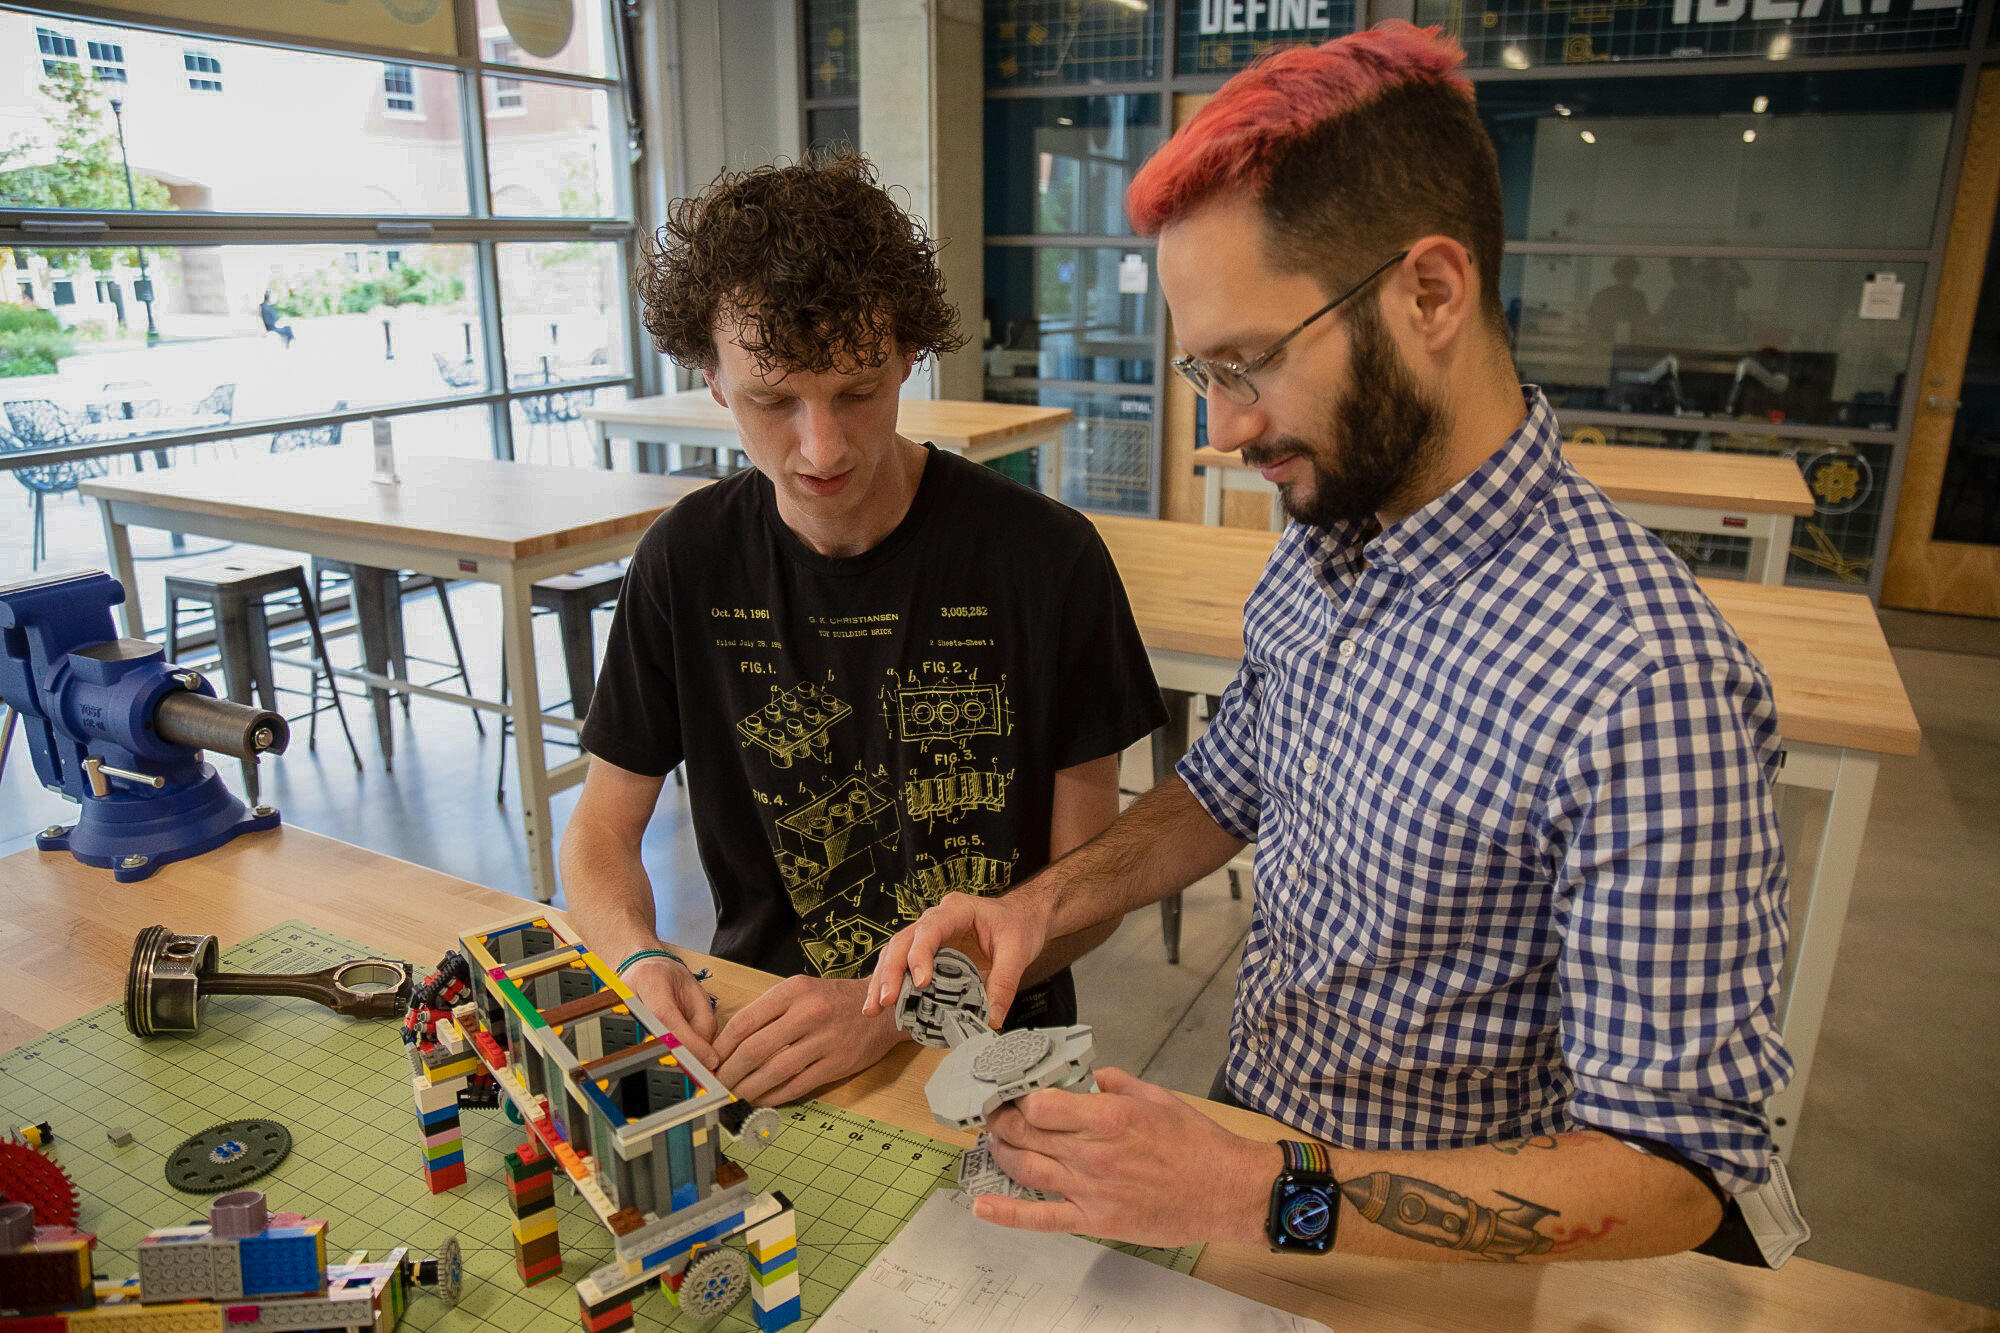 A student and a professor in a classroom work together building LEGOs.